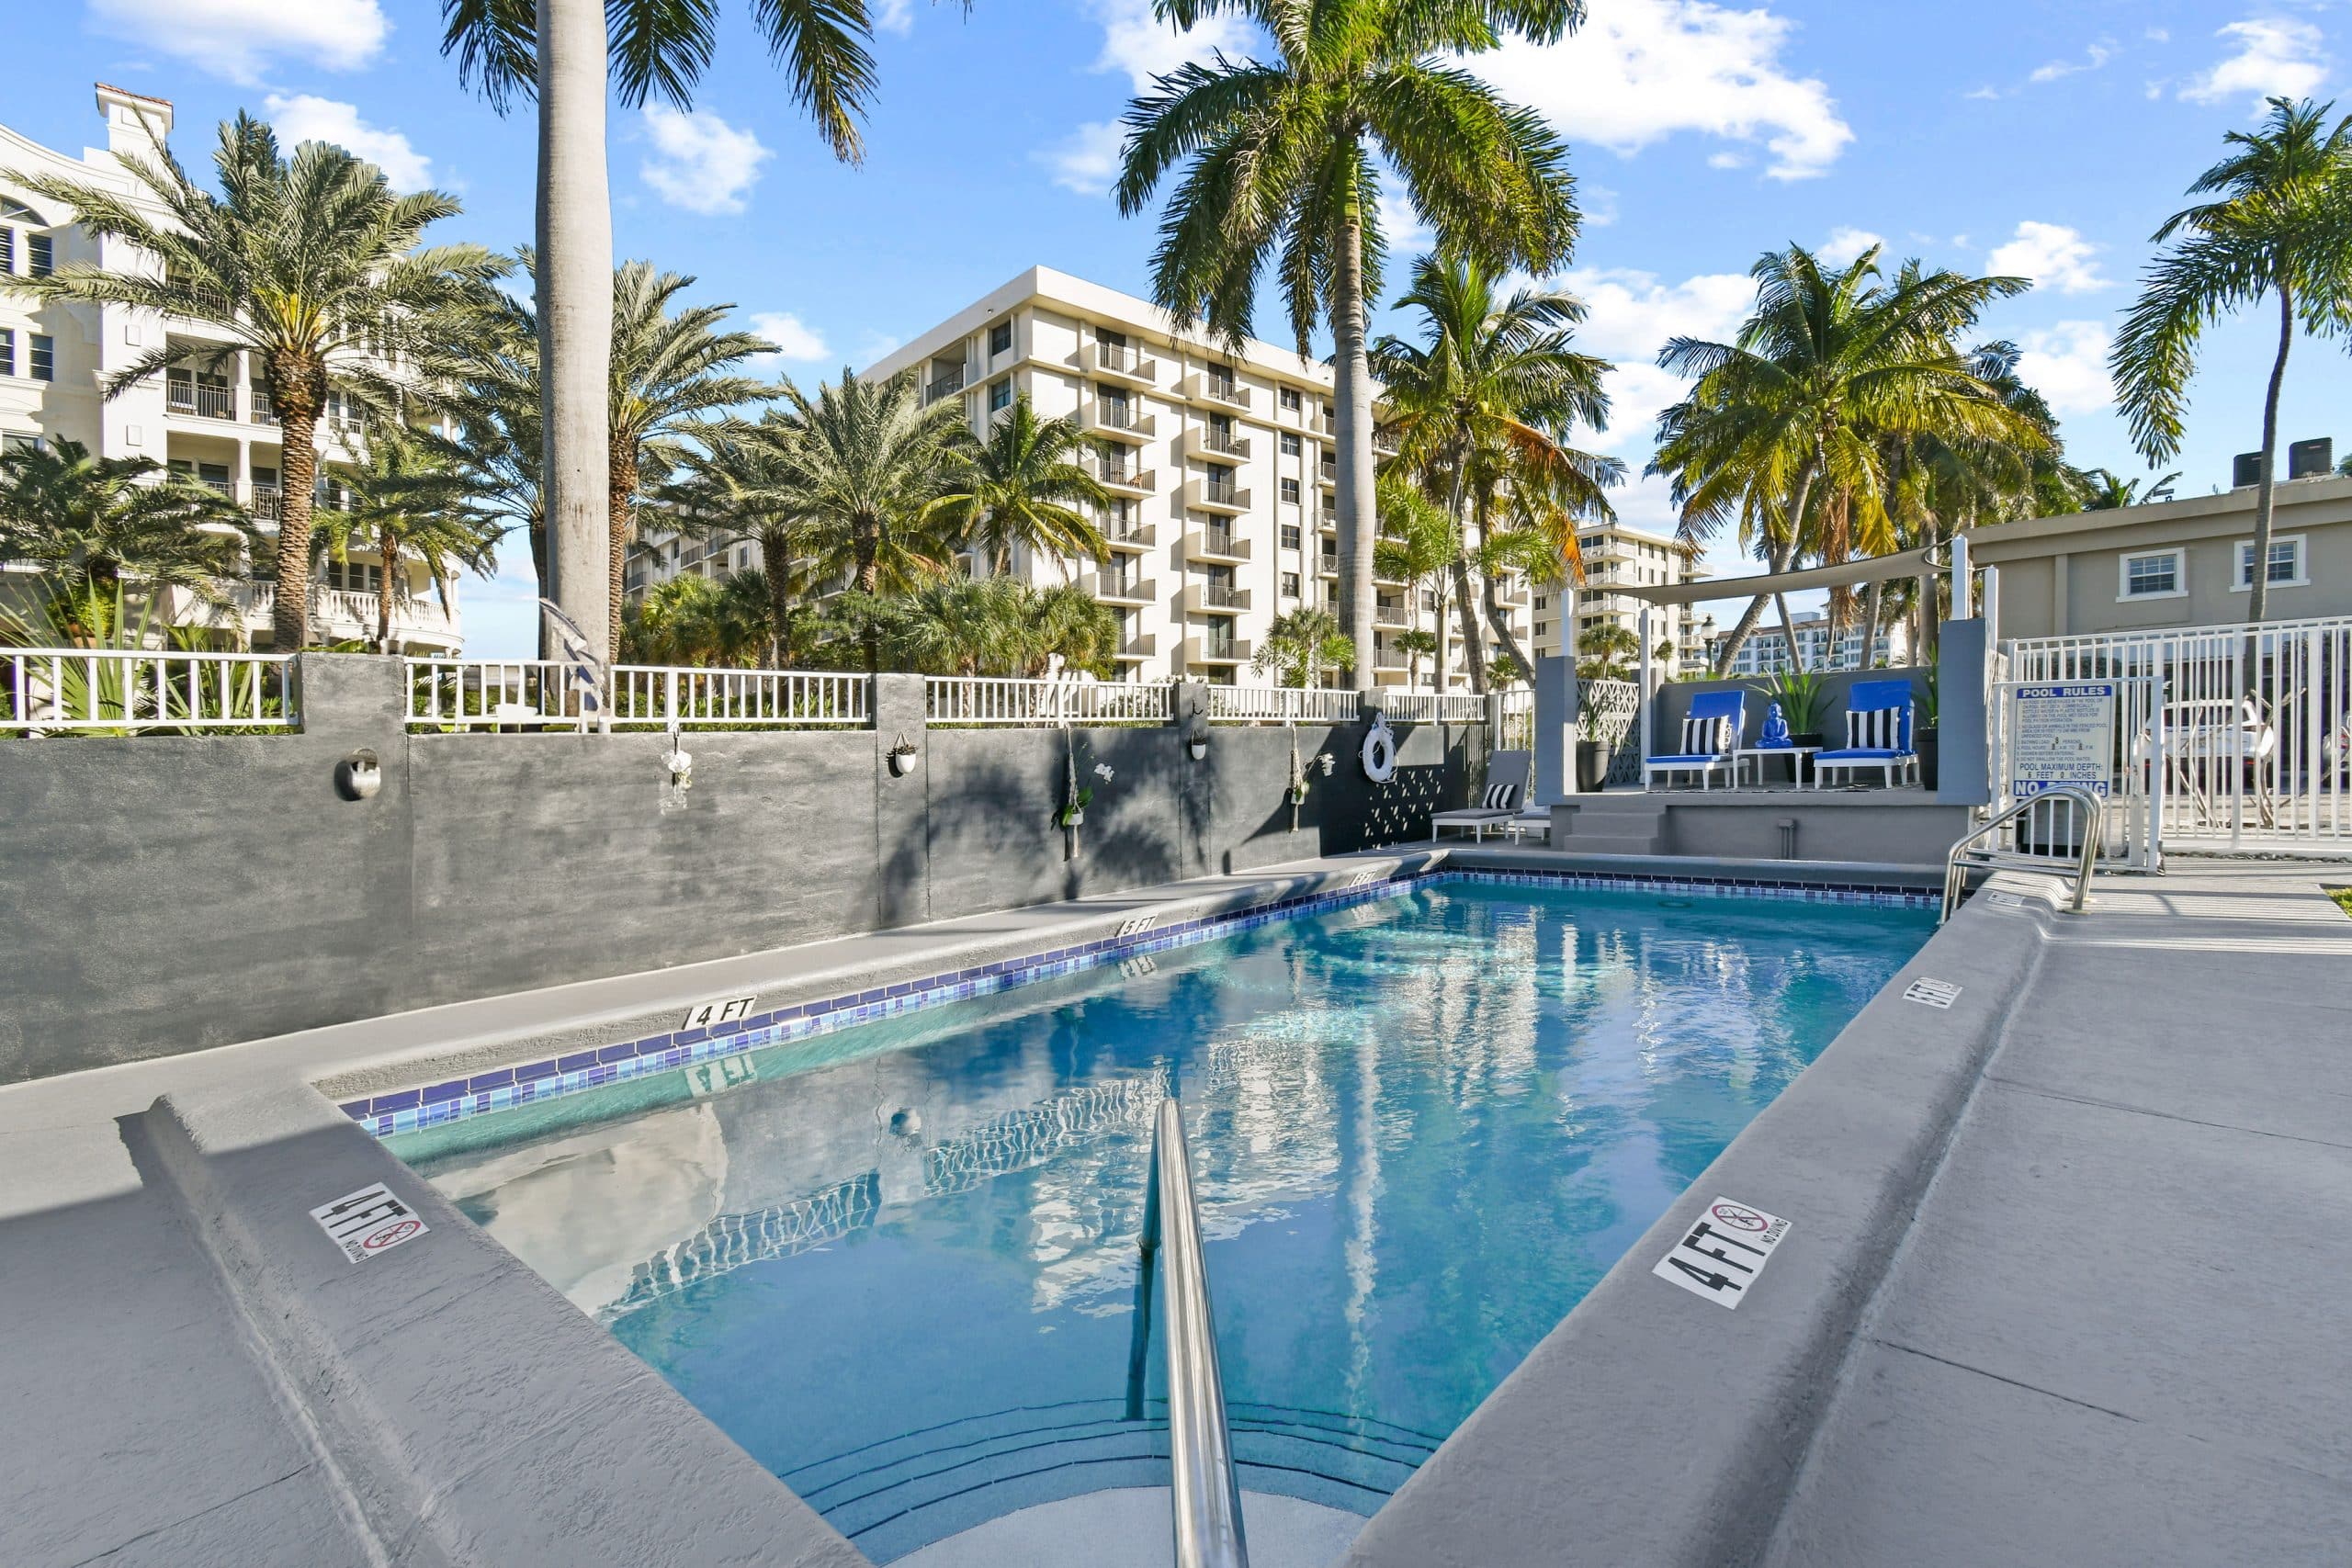 Enjoy luxury with our pool, beach access, and cozy suites for your perfect getaway!